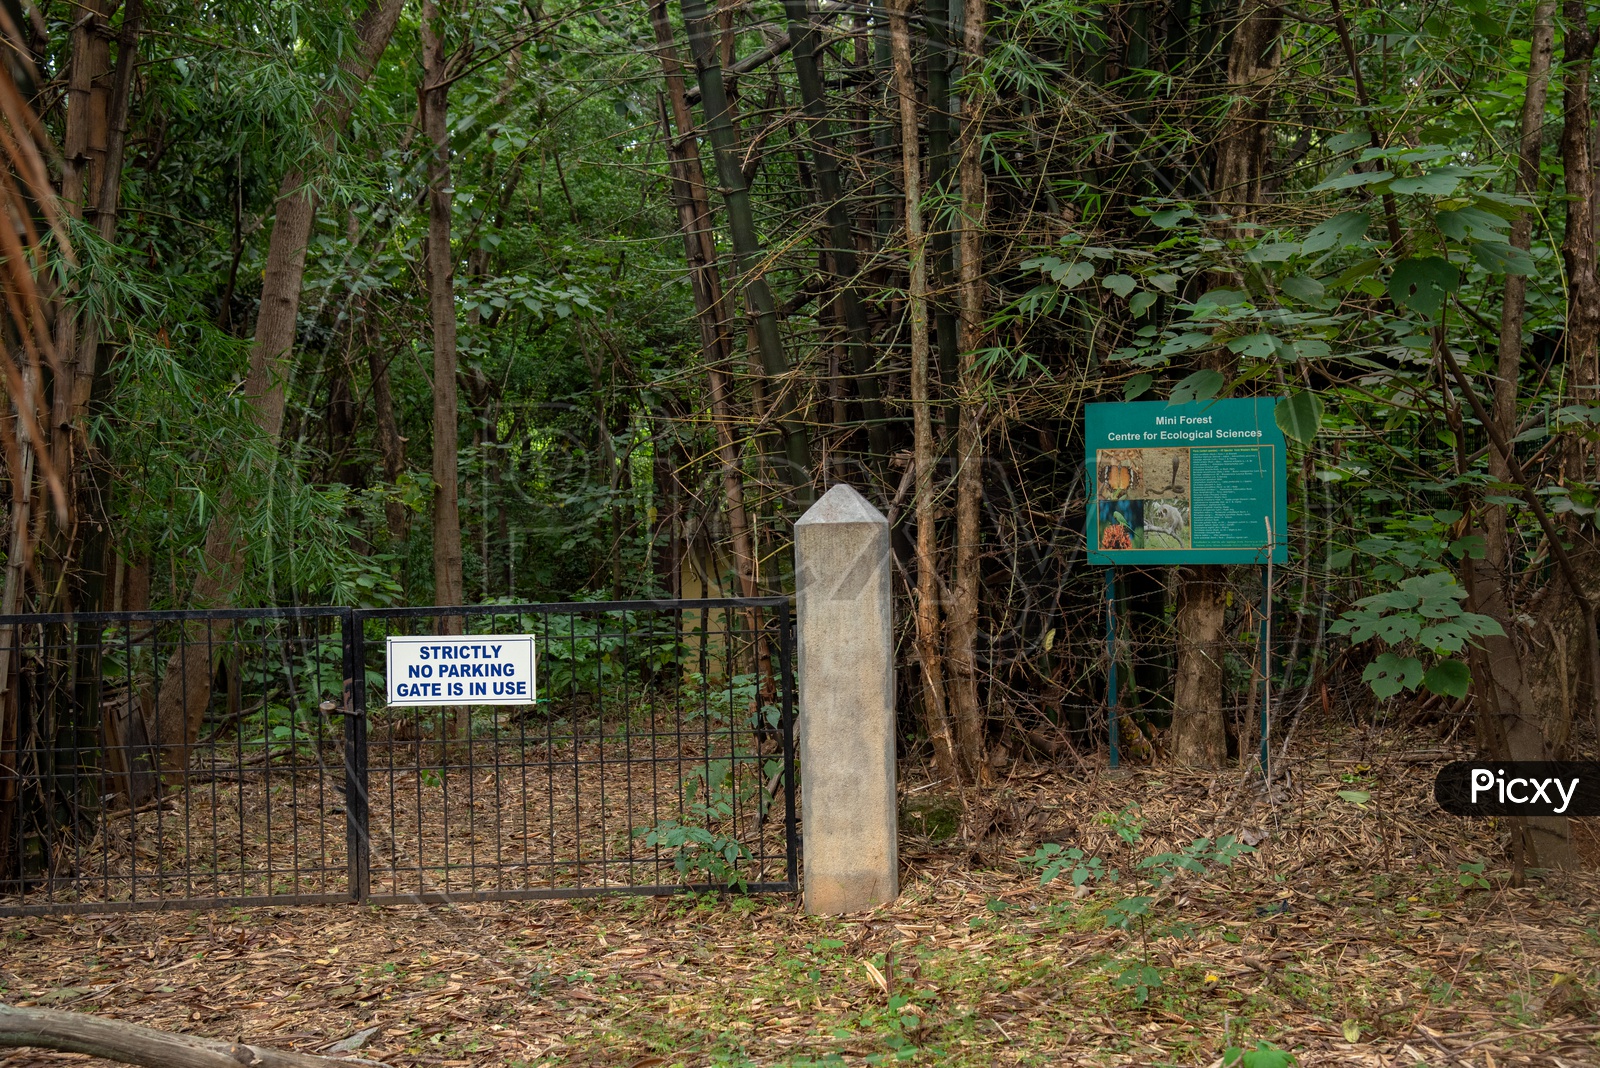 IISC Mini Forest centre for ecological sciences